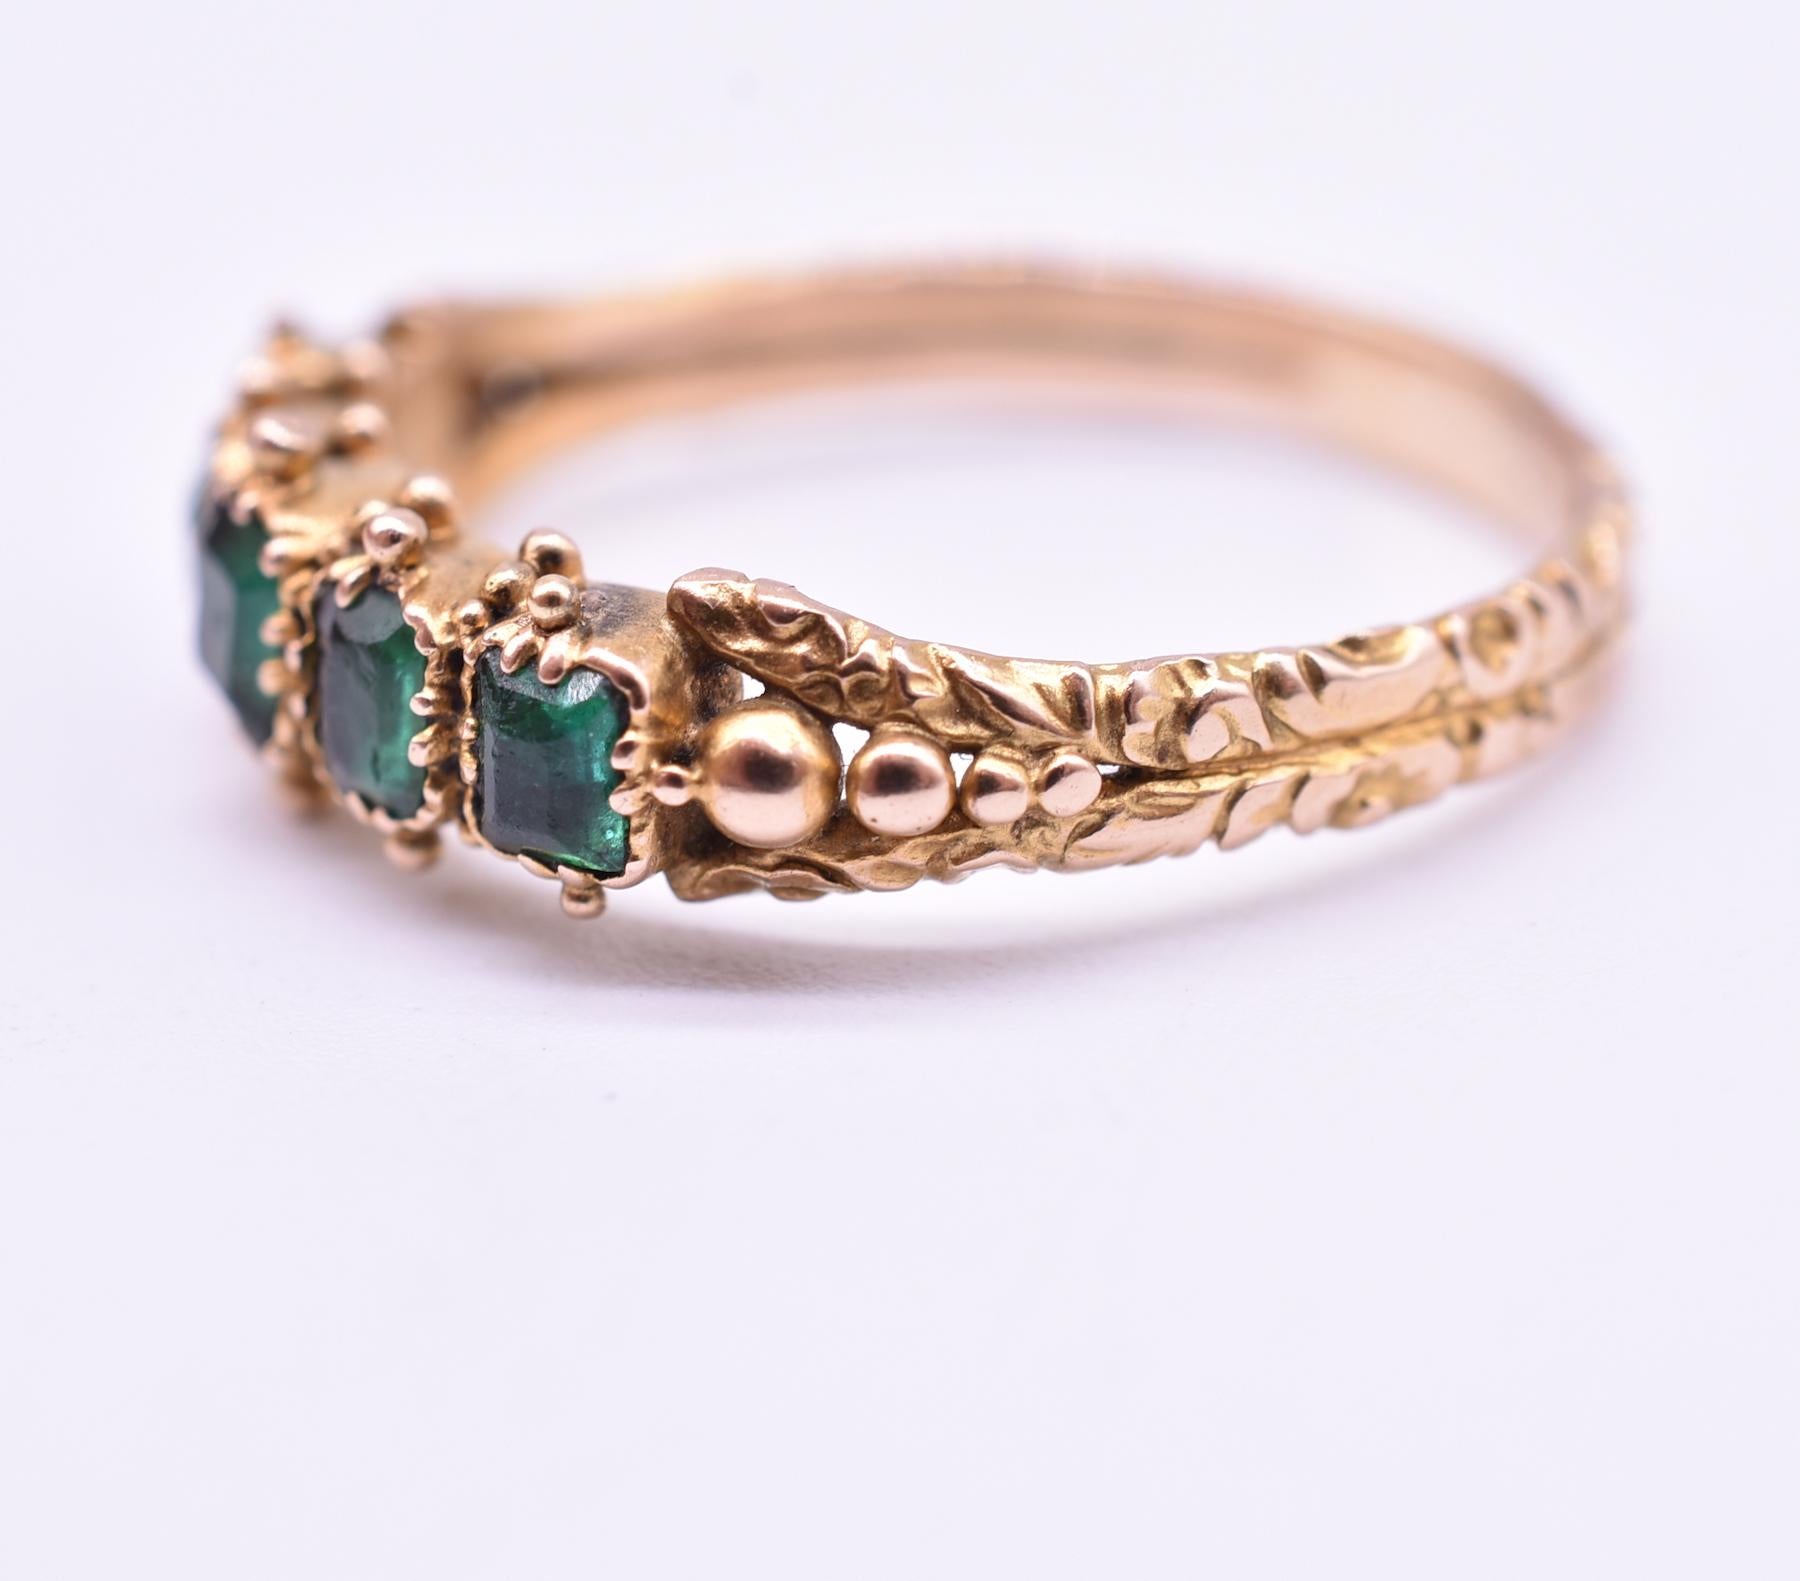 Lovely 18K late Georgian 5 stone closed-back emerald ring. Repousse work on the band and delicate gold balls above and below the emeralds are especially pleasing to the eye. Georgian closed-back rings like this one were backed with foil to enhance